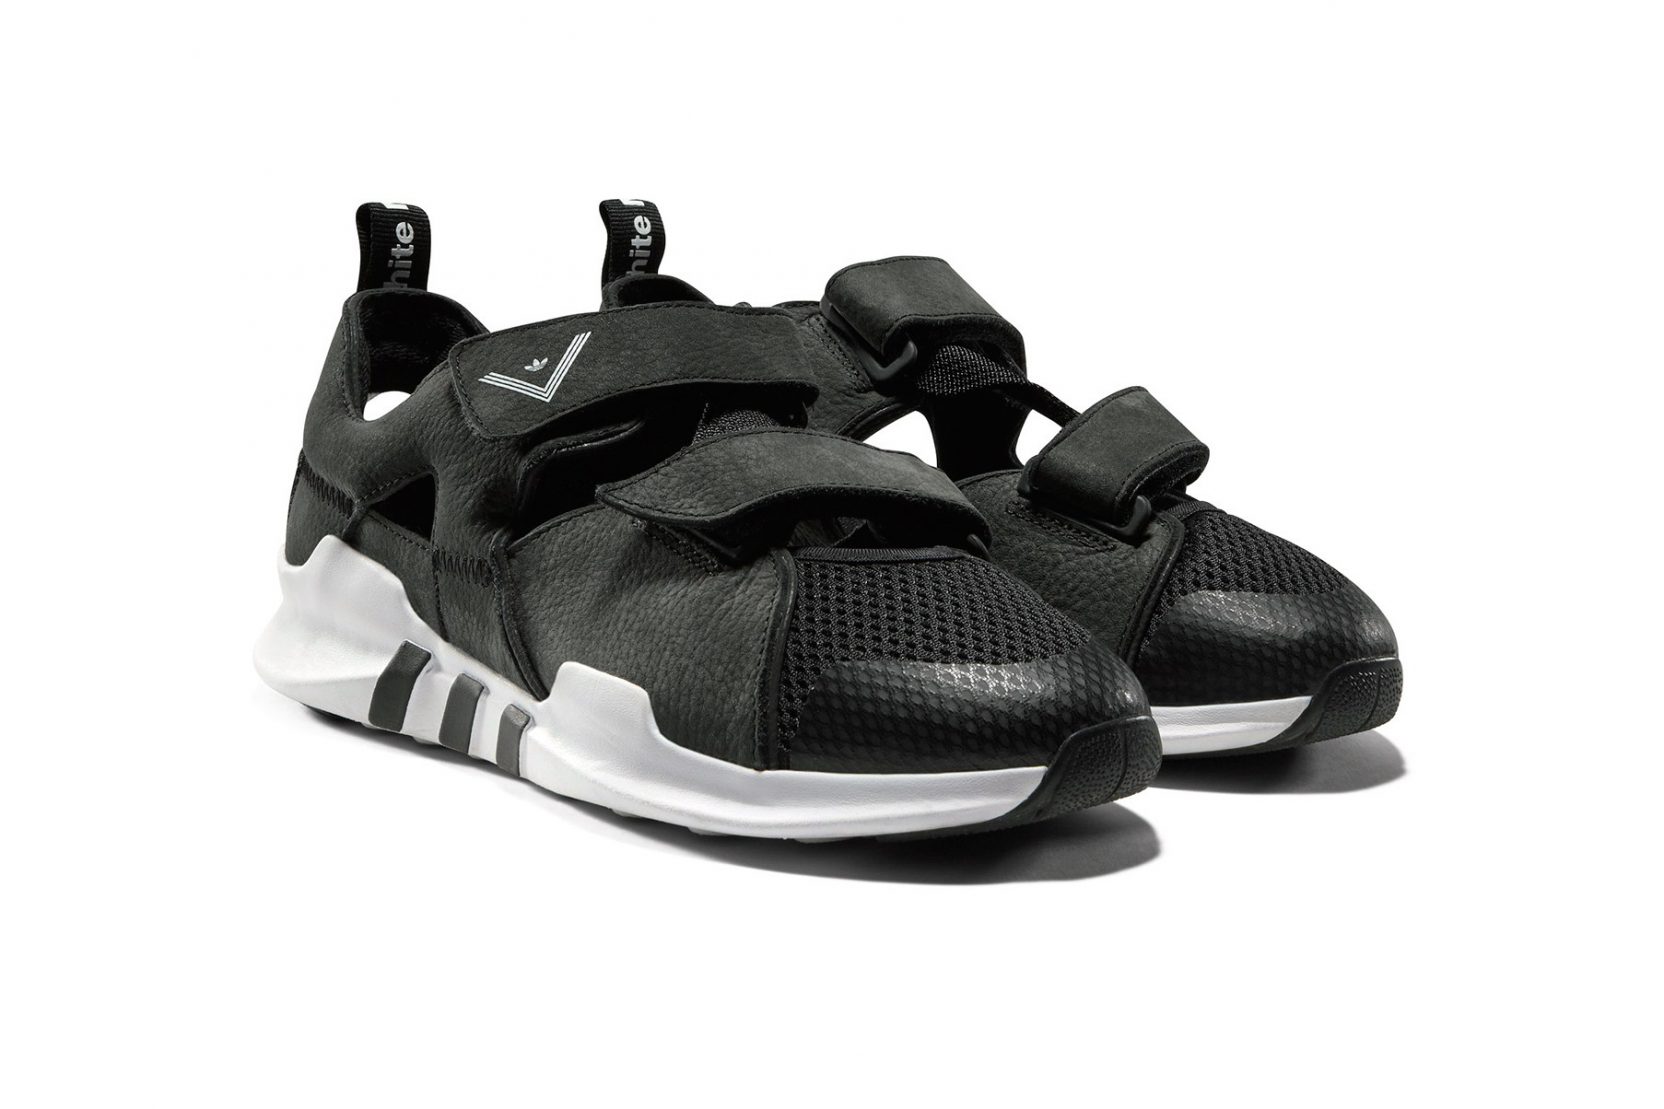 White Mountaineering x Adidas Spring Collection 8